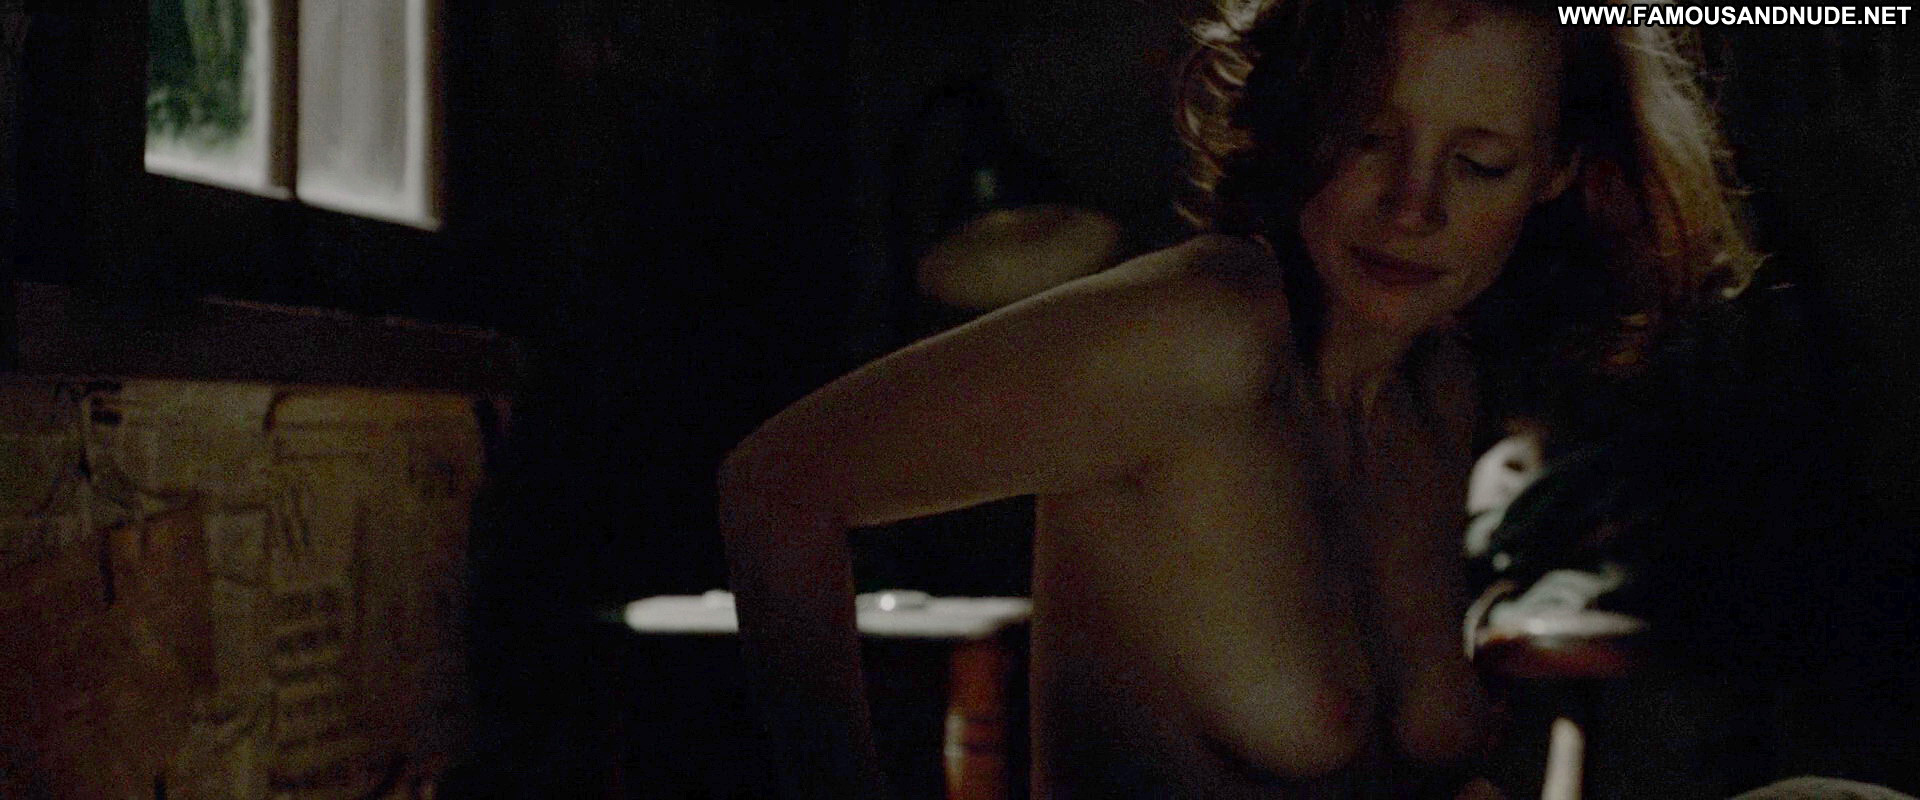 Lawless Jessica Chastain Babe Beautiful Movie Posing Hot Topless Hd Celebri...